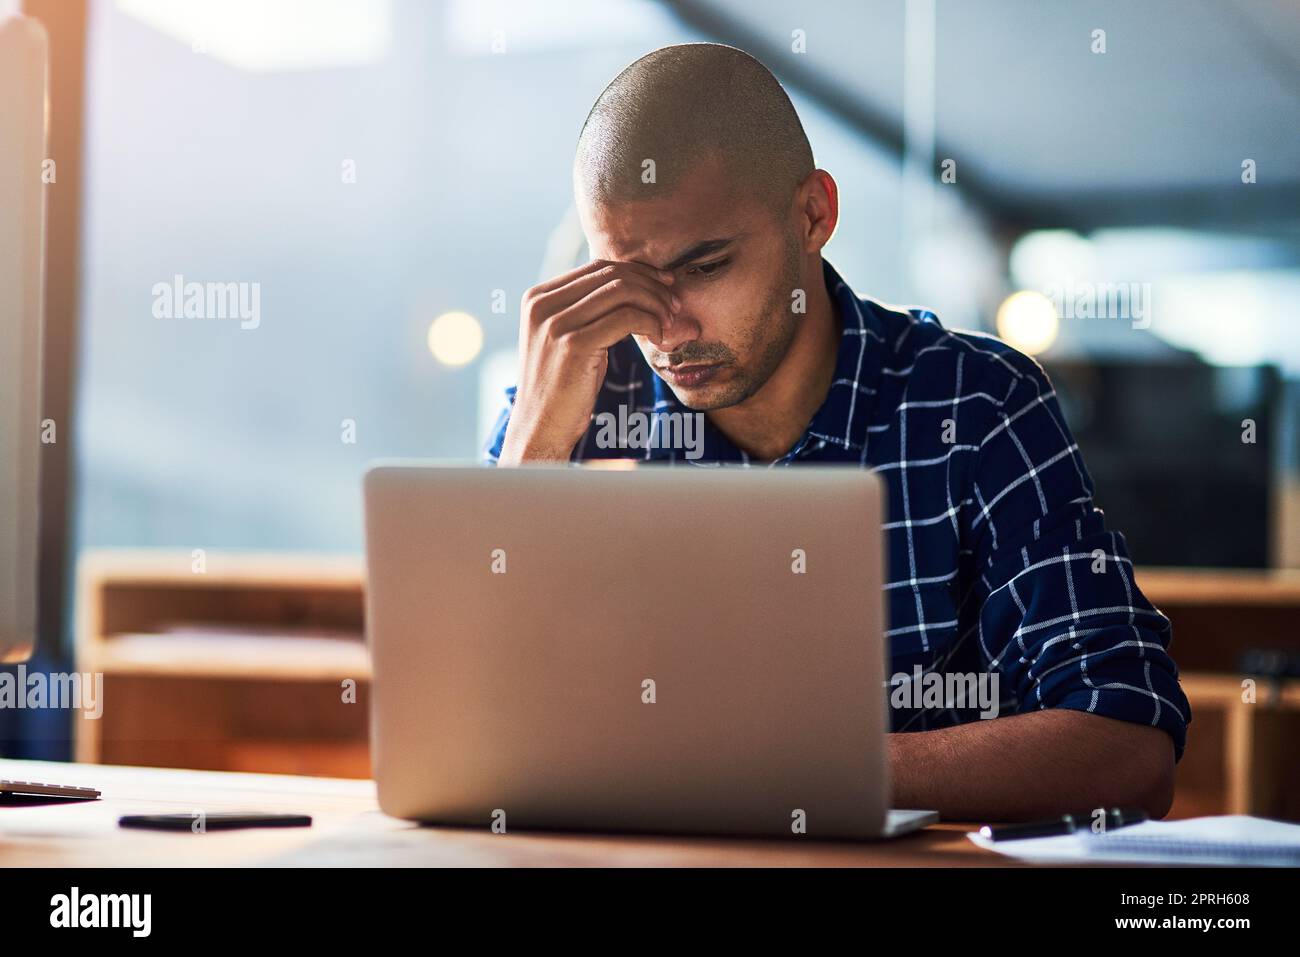 Hes struggle to keep up with the demands of work. a young designer looking stressed out while working at his office desk. Stock Photo